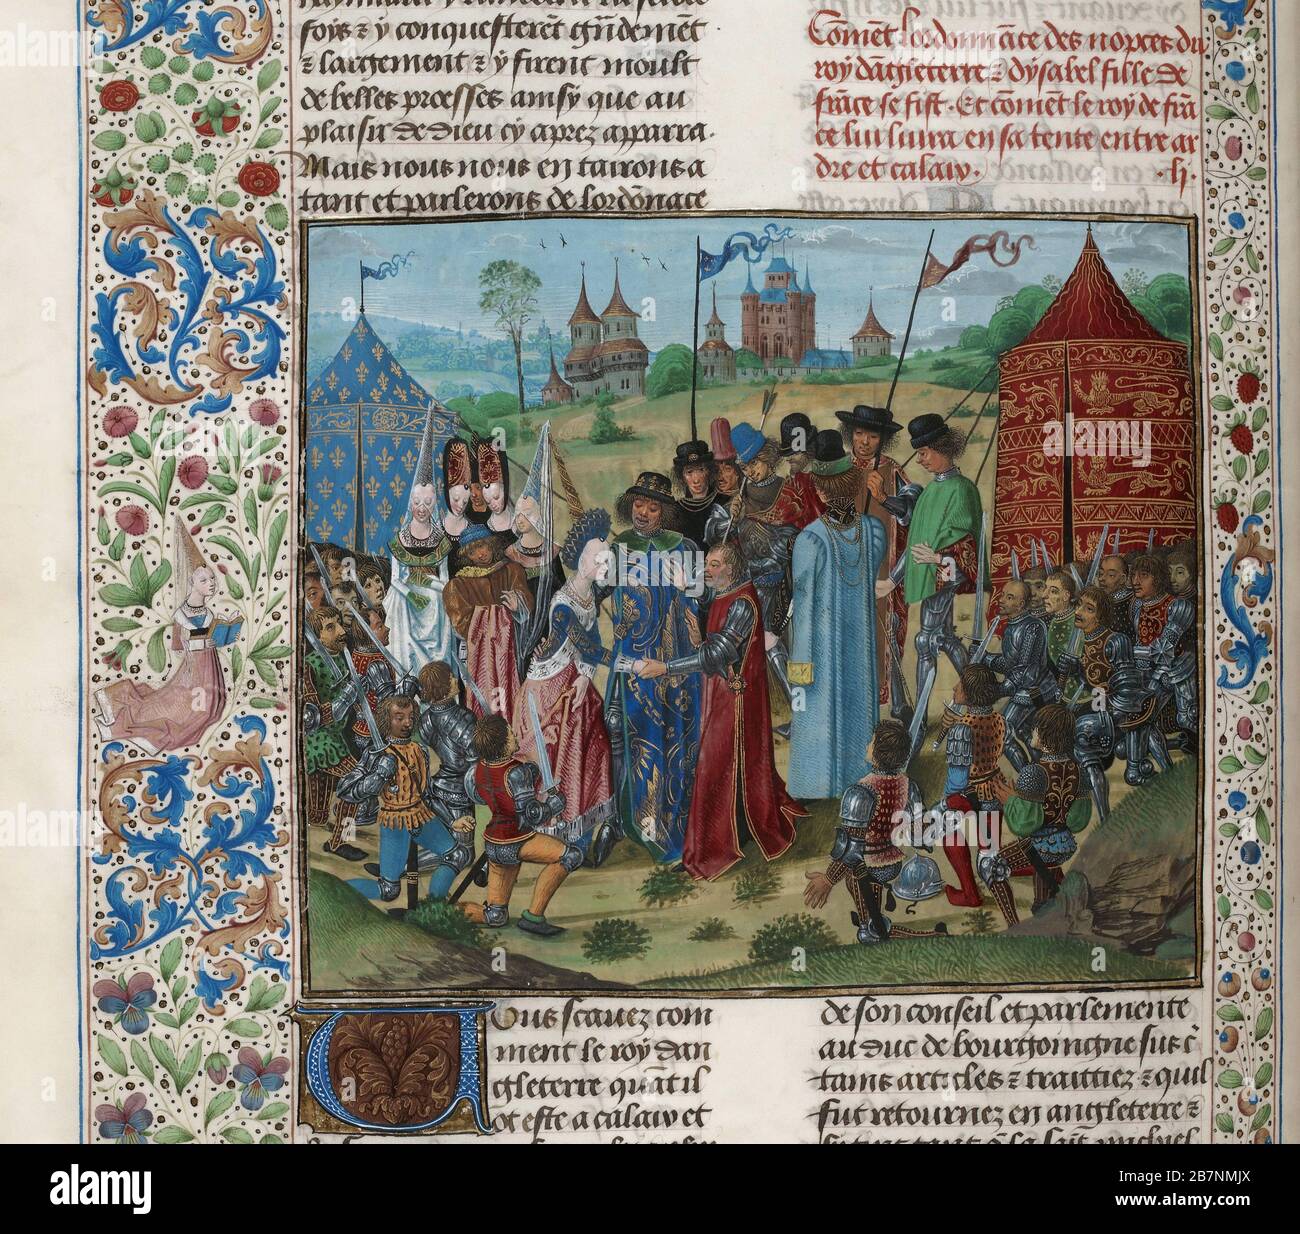 Marriage of Isabella of Valois and Richard II (Miniature from the Grandes Chroniques de France by Jean Froissart), ca 1470-1475. Found in the Collection of Biblioth&#xe8;que Nationale de France. Stock Photo